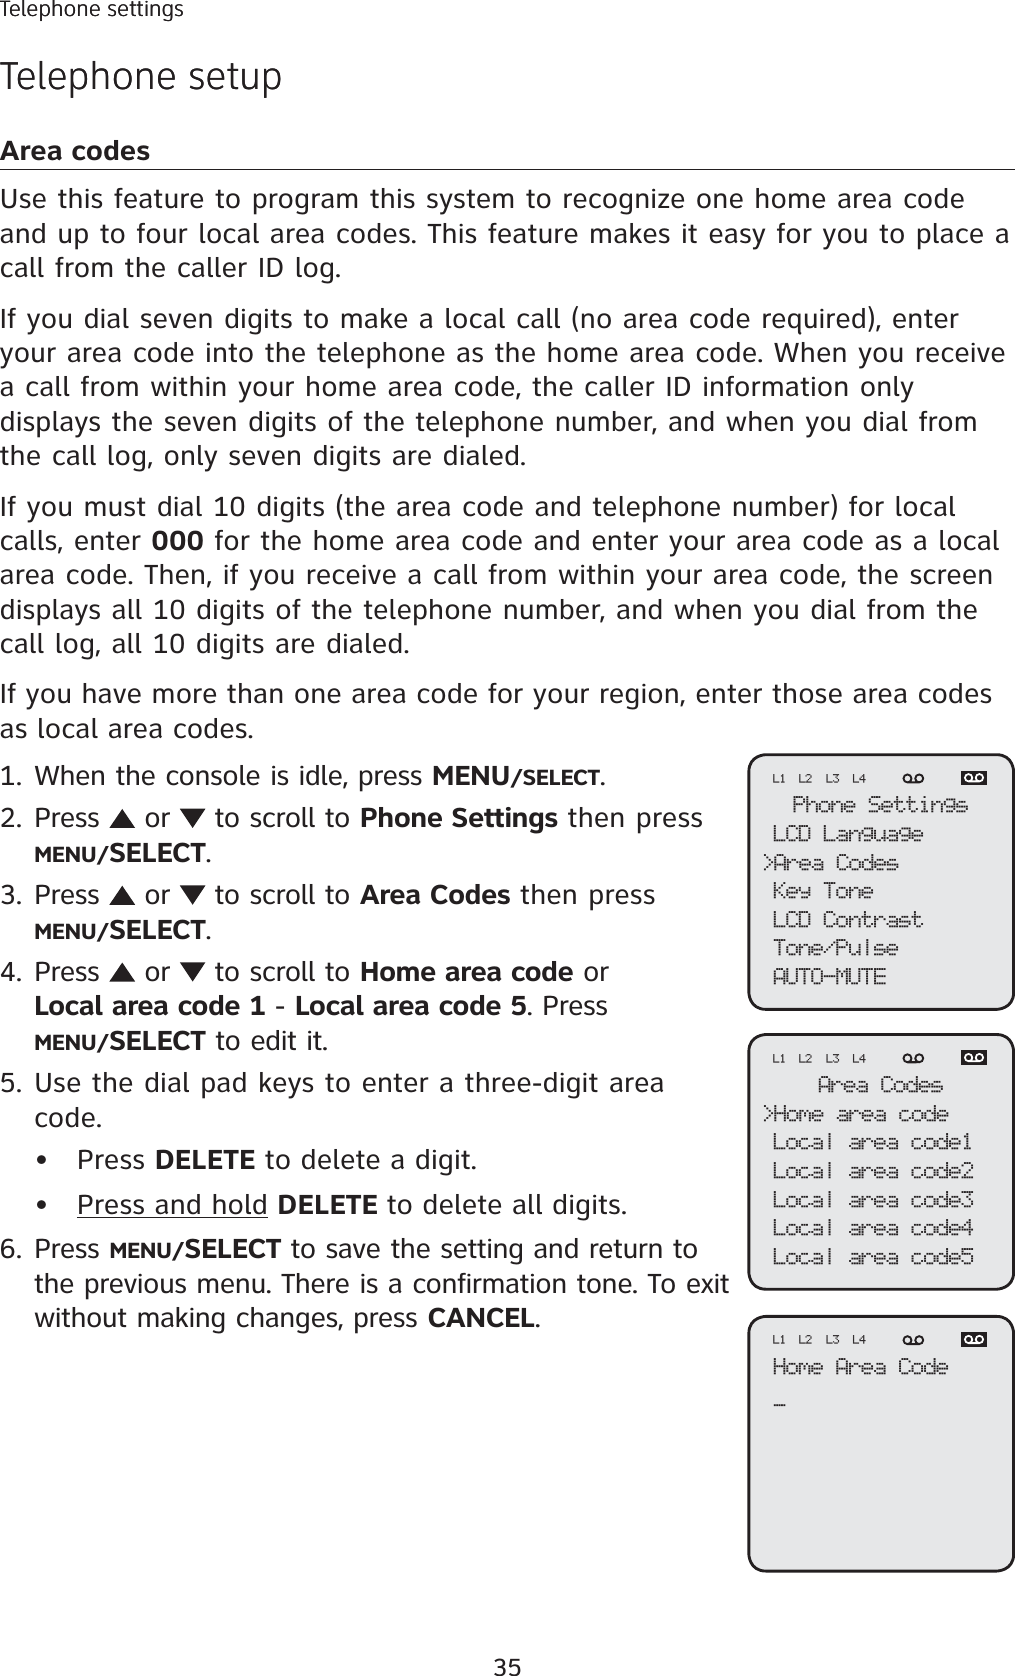 35Telephone settingsTelephone setupArea codesUse this feature to program this system to recognize one home area code and up to four local area codes. This feature makes it easy for you to place a call from the caller ID log. If you dial seven digits to make a local call (no area code required), enter your area code into the telephone as the home area code. When you receive a call from within your home area code, the caller ID information only displays the seven digits of the telephone number, and when you dial from the call log, only seven digits are dialed.If you must dial 10 digits (the area code and telephone number) for local calls, enter 000 for the home area code and enter your area code as a local area code. Then, if you receive a call from within your area code, the screen displays all 10 digits of the telephone number, and when you dial from the call log, all 10 digits are dialed. If you have more than one area code for your region, enter those area codes as local area codes. When the console is idle, press MENU/SELECT.Press   or   to scroll to Phone Settings then pressMENU/SELECT.Press   or   to scroll to Area Codes then pressMENU/SELECT.Press   or   to scroll to Home area code or Local area code 1 - Local area code 5. Press MENU/SELECT to edit it. Use the dial pad keys to enter a three-digit area code. Press DELETE to delete a digit.Press and hold DELETE to delete all digits.Press MENU/SELECT to save the setting and return to the previous menu. There is a confirmation tone. To exit without making changes, press CANCEL.1.2.3.4.5.••6.Phone SettingsLCD Language&gt;Area CodesKey ToneLCD ContrastTone/PulseAUTO-MUTEL1 L2 L3 L4Area Codes&gt;Home area codeLocal area code1Local area code2Local area code3Local area code4Local area code5L1 L2 L3 L4Home Area Code_L1 L2 L3 L4Telephone settingsTelephone setup